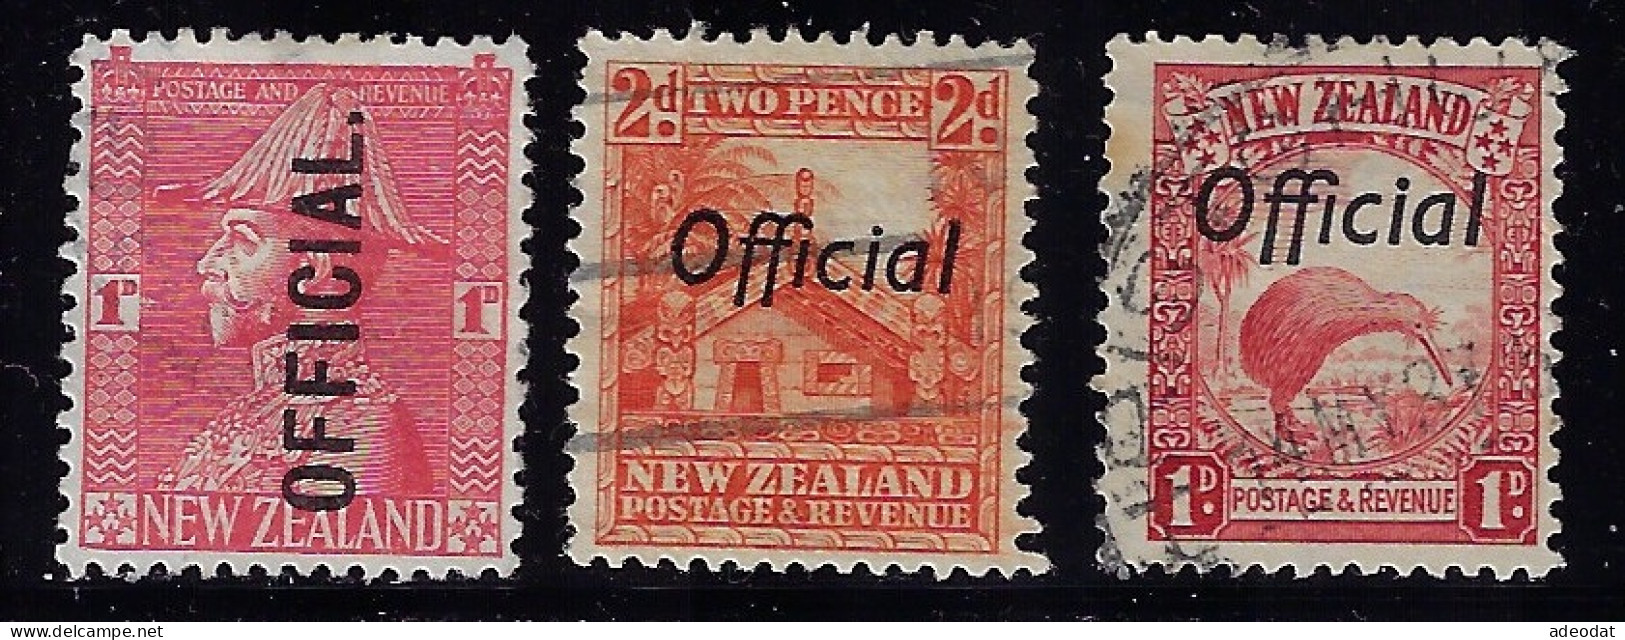 NEW ZEALAND 1936 0FFICIAL STAMPS  SCOTT #O55,O58,O64 USED - Dienstmarken